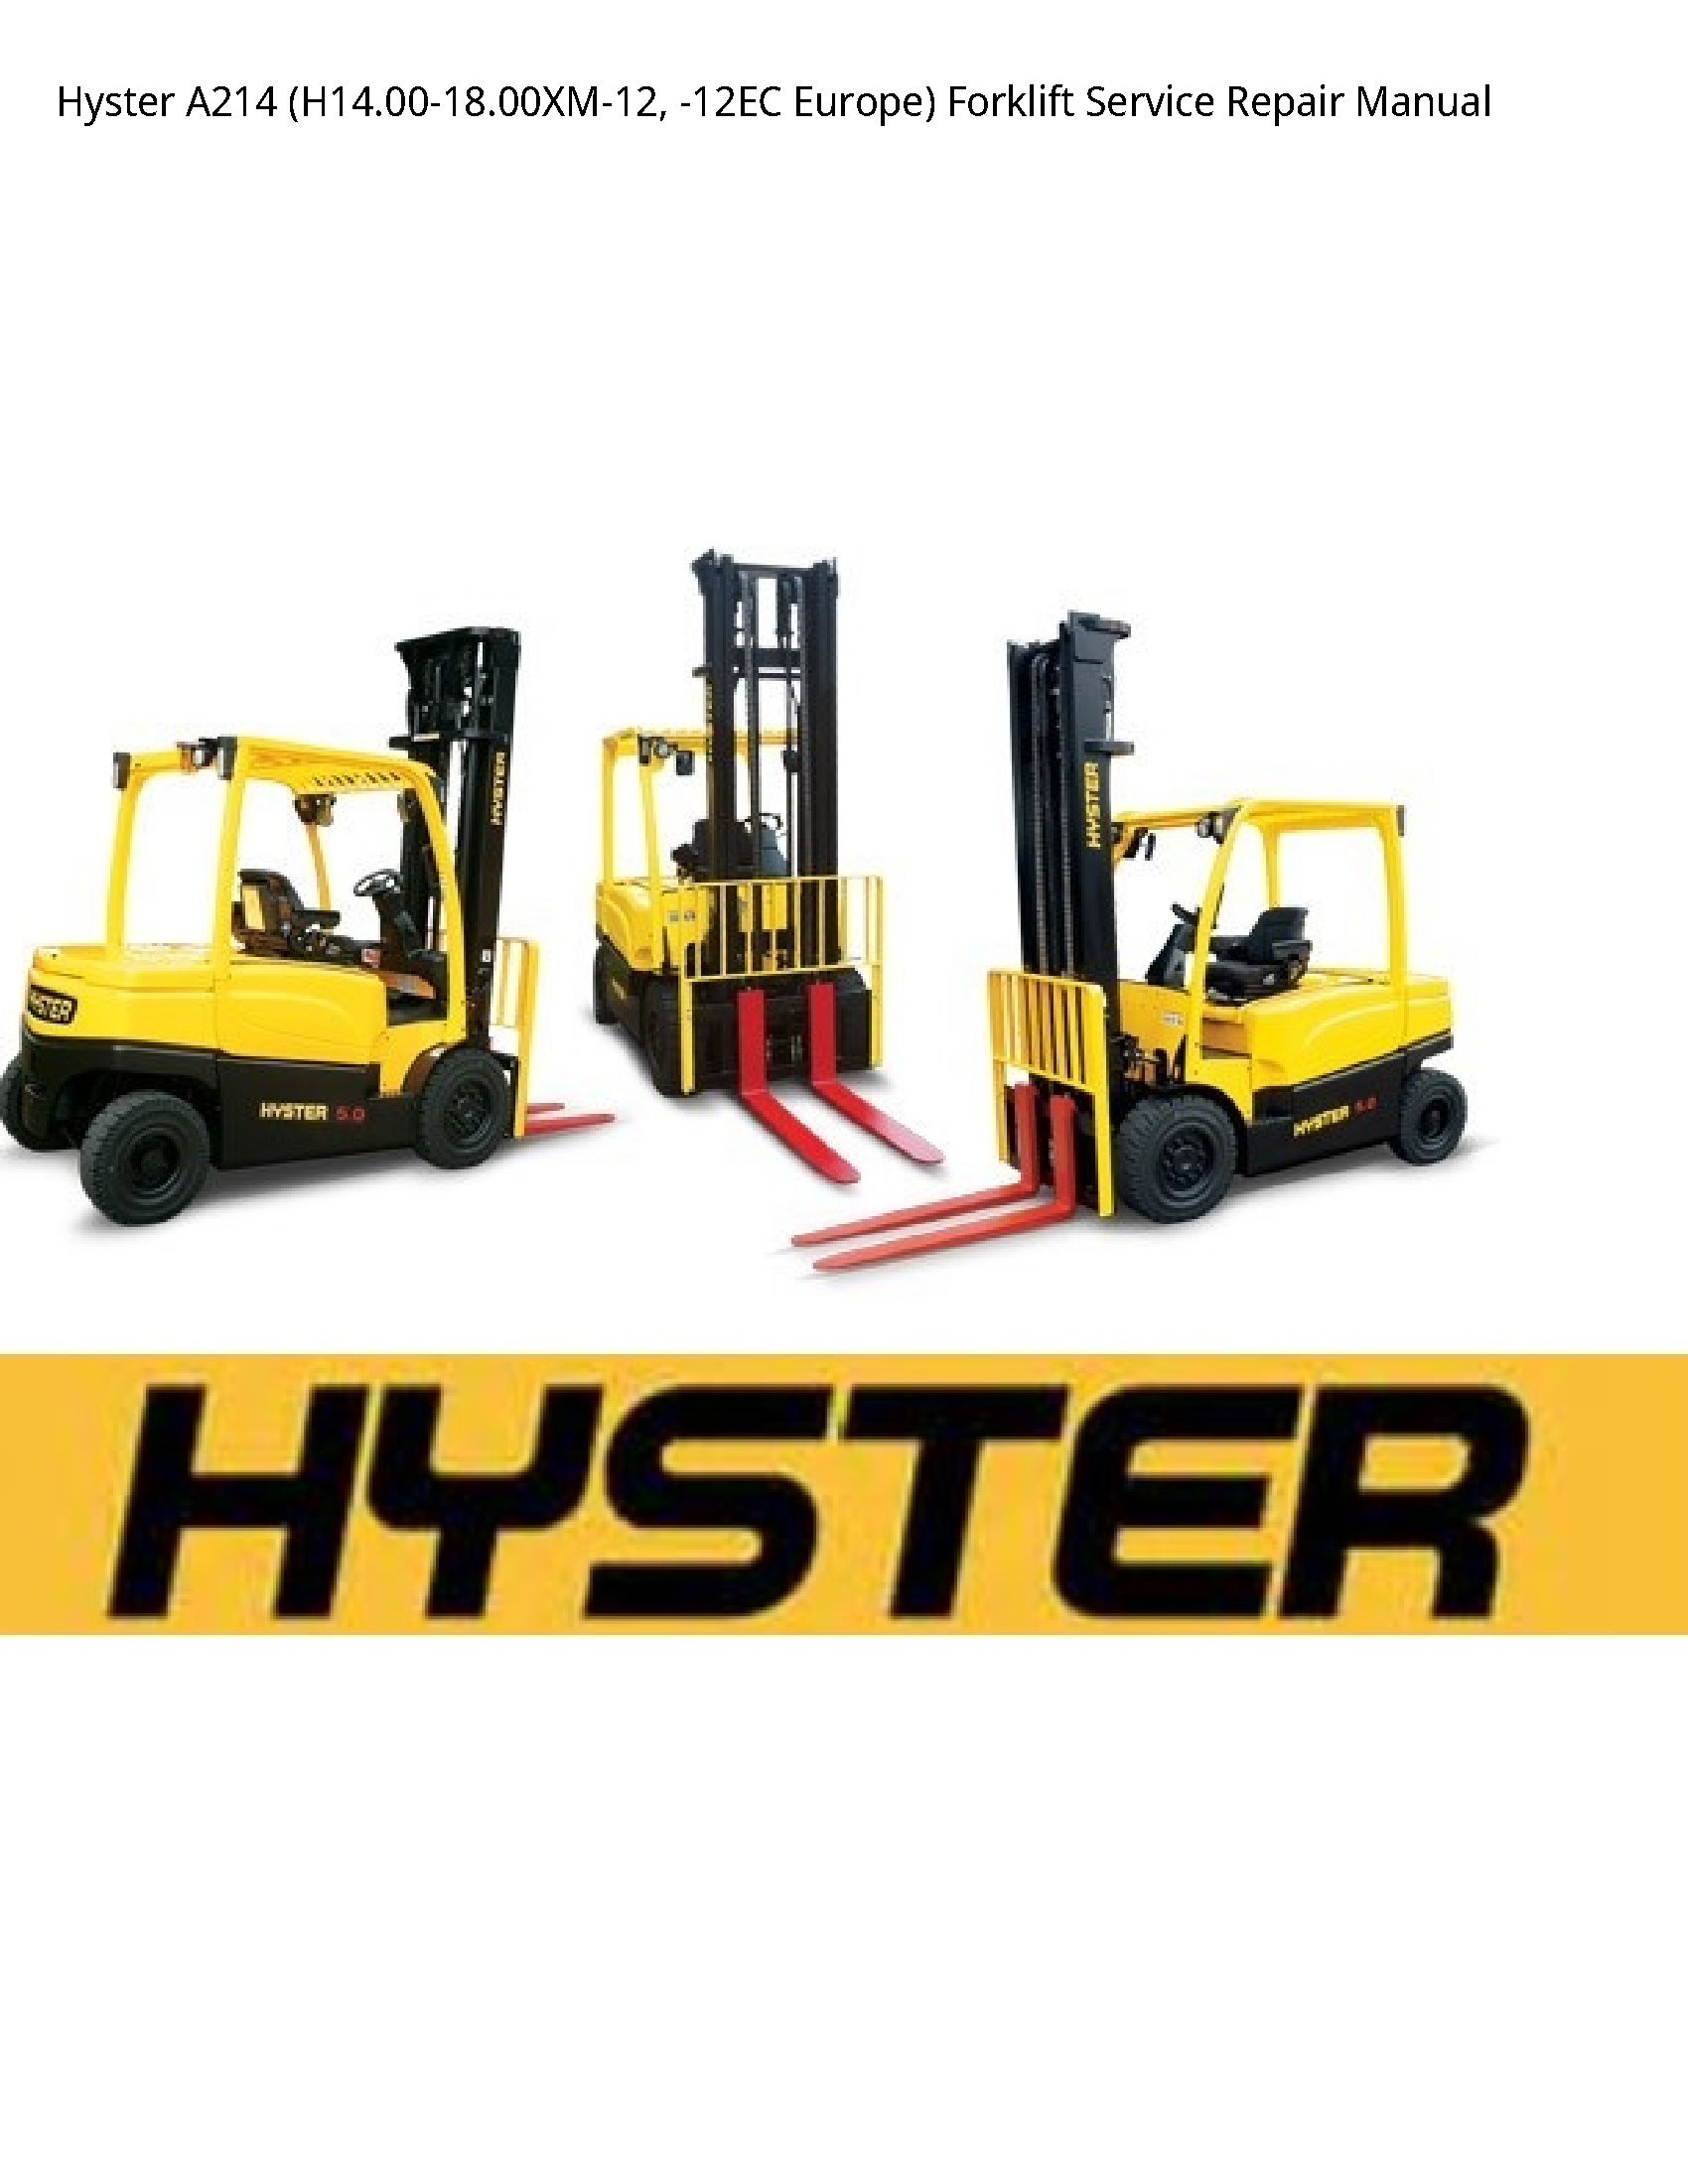 Hyster A214 Europe) Forklift manual